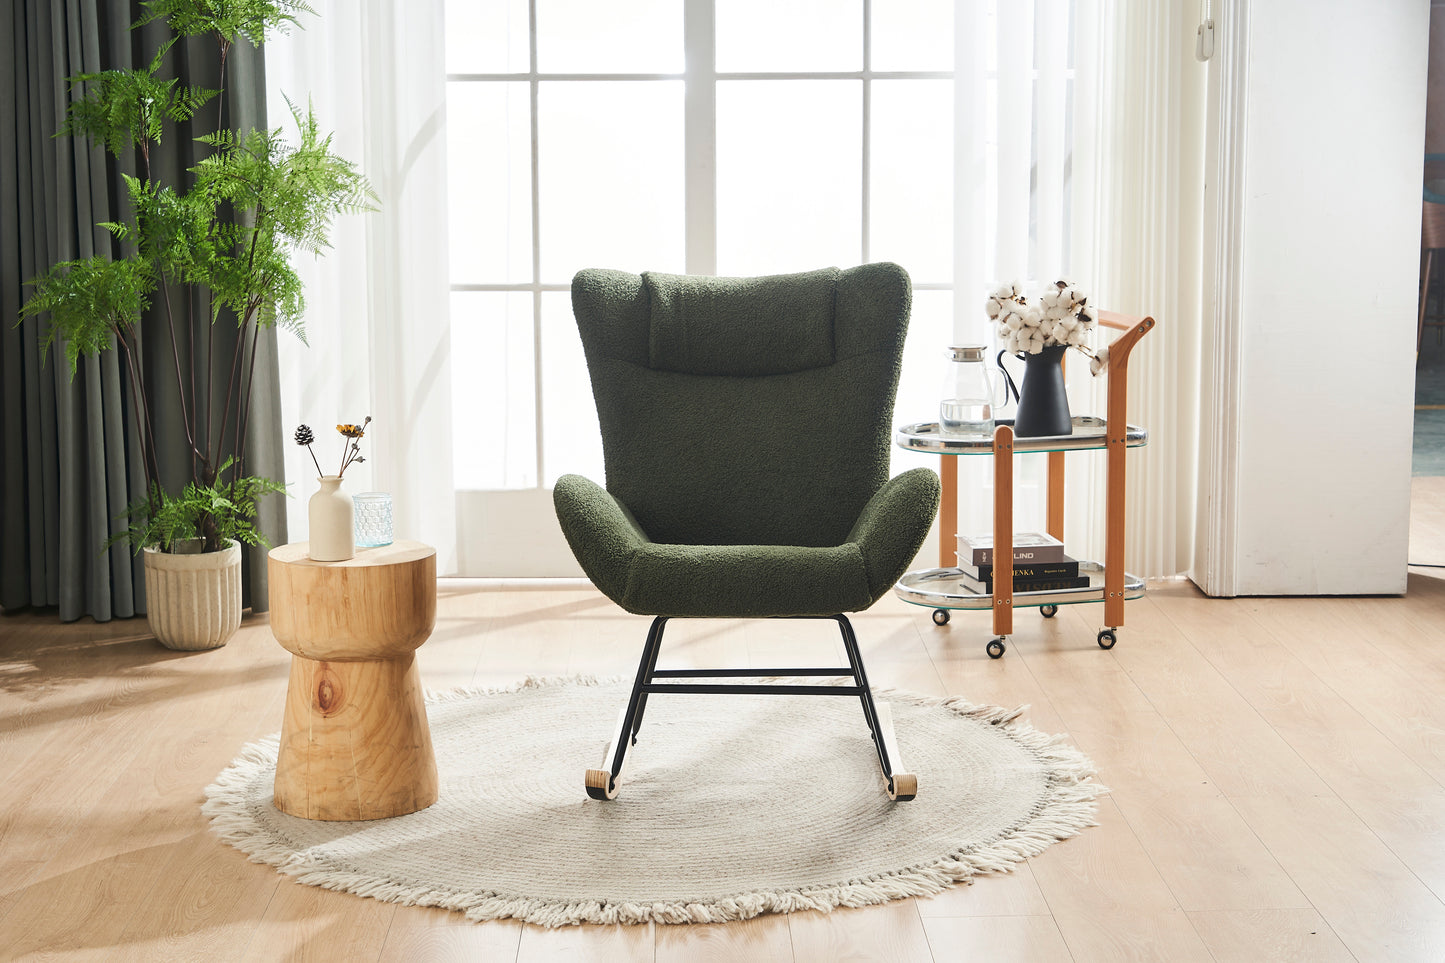 Rocking Chair Nursery, Solid Wood Legs Reading Chair with Teddy Fabric Upholstered , Nap Armchair for Living Rooms, Bedrooms, Offices, Best Gift,Green Teddy fabric